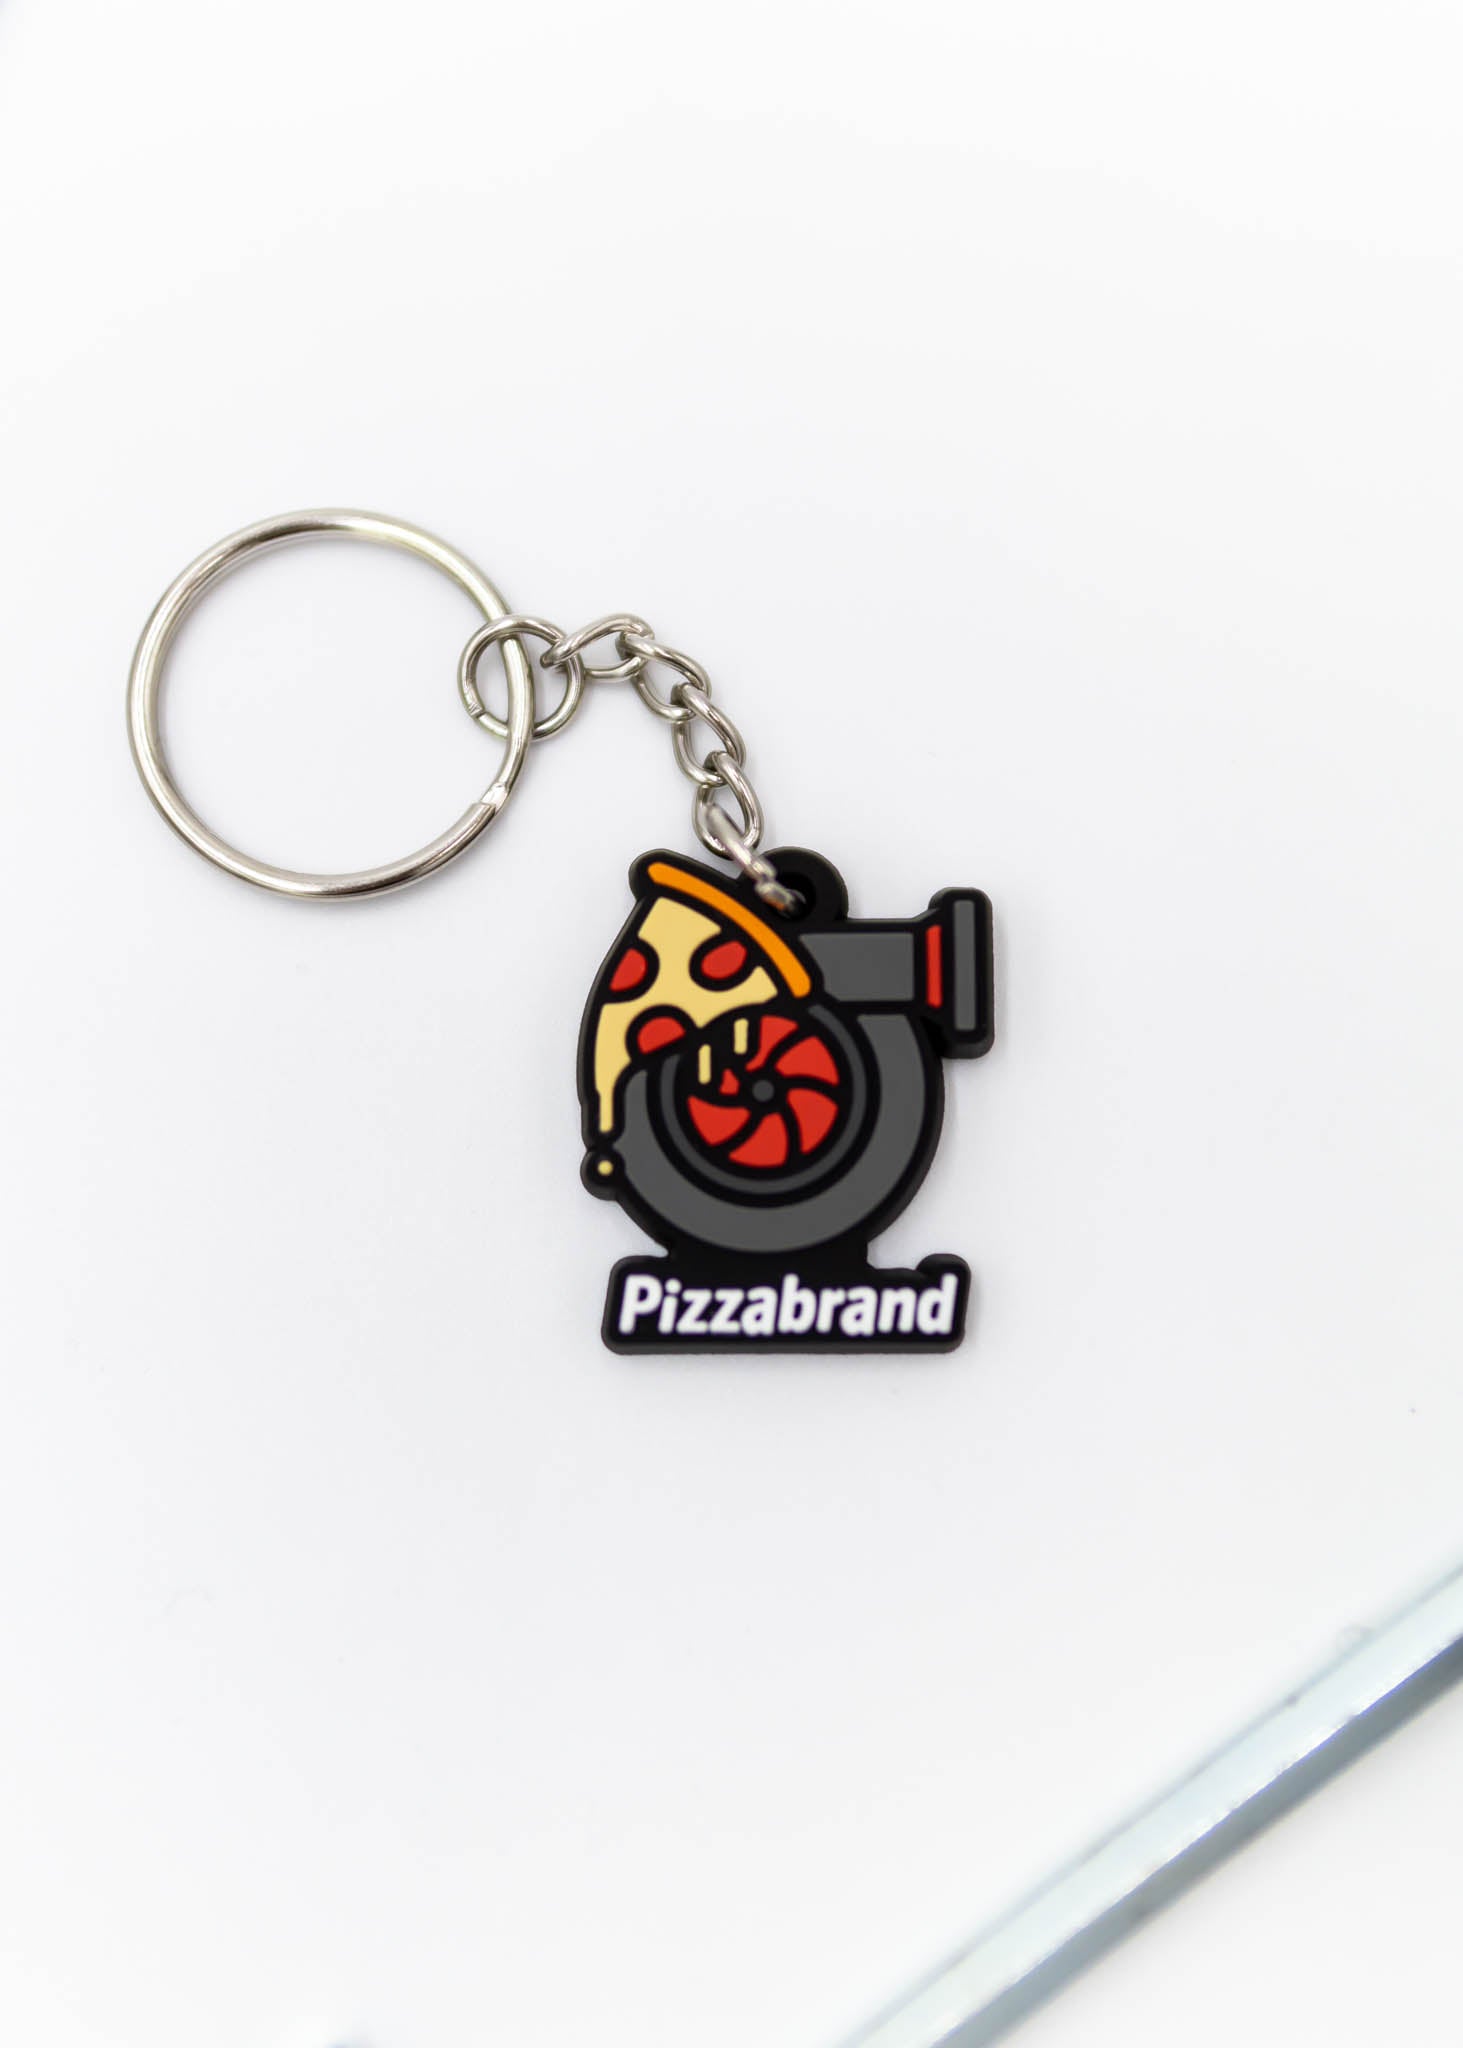 A pizzabrand pizza and turbo keychain. Made of rubber and stainless steel. Photo is of a close up of the pizza melting on a turbo with the brand name.